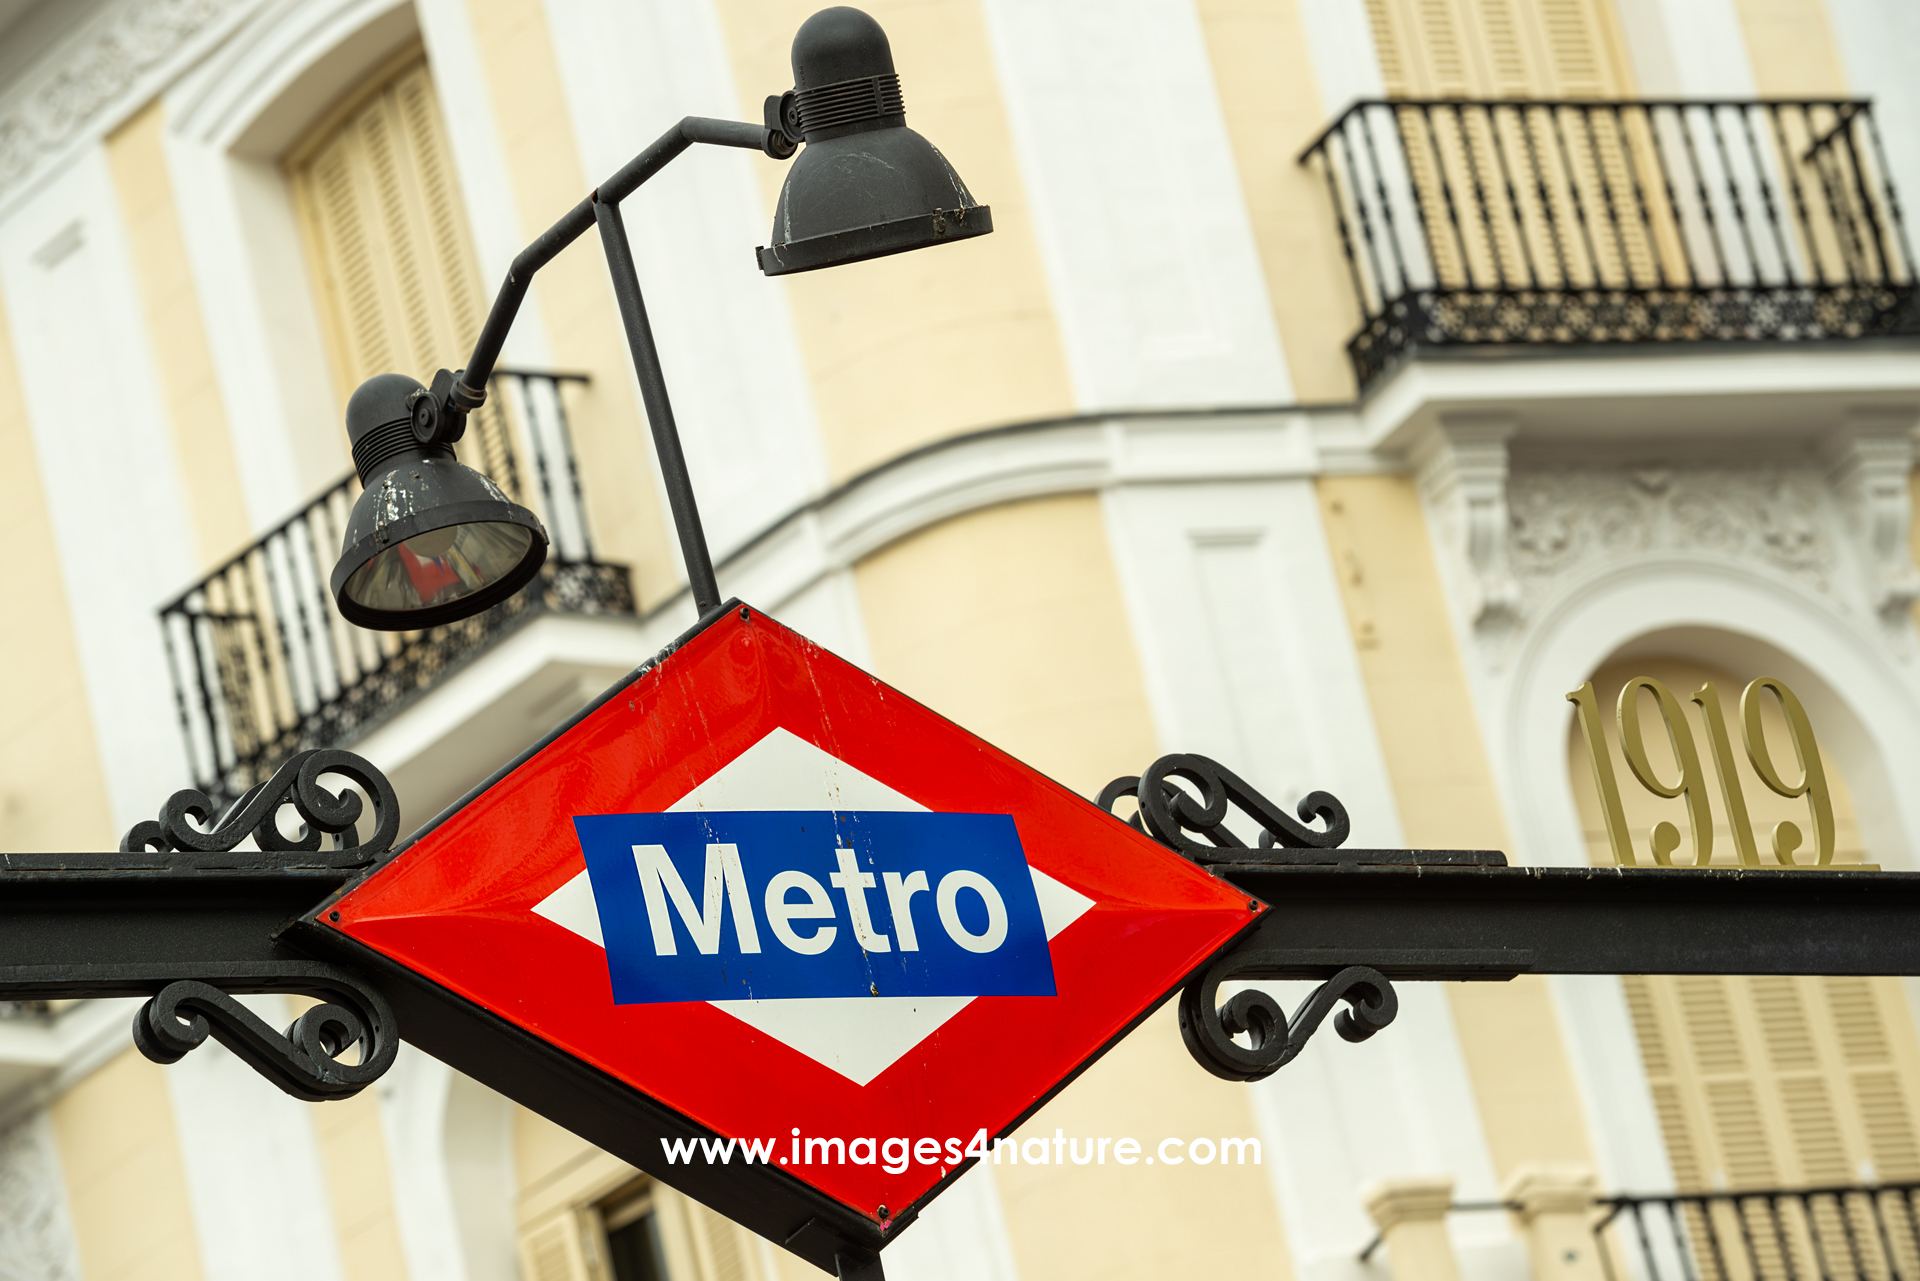 Metro station sign with nice Madrid building facade as background